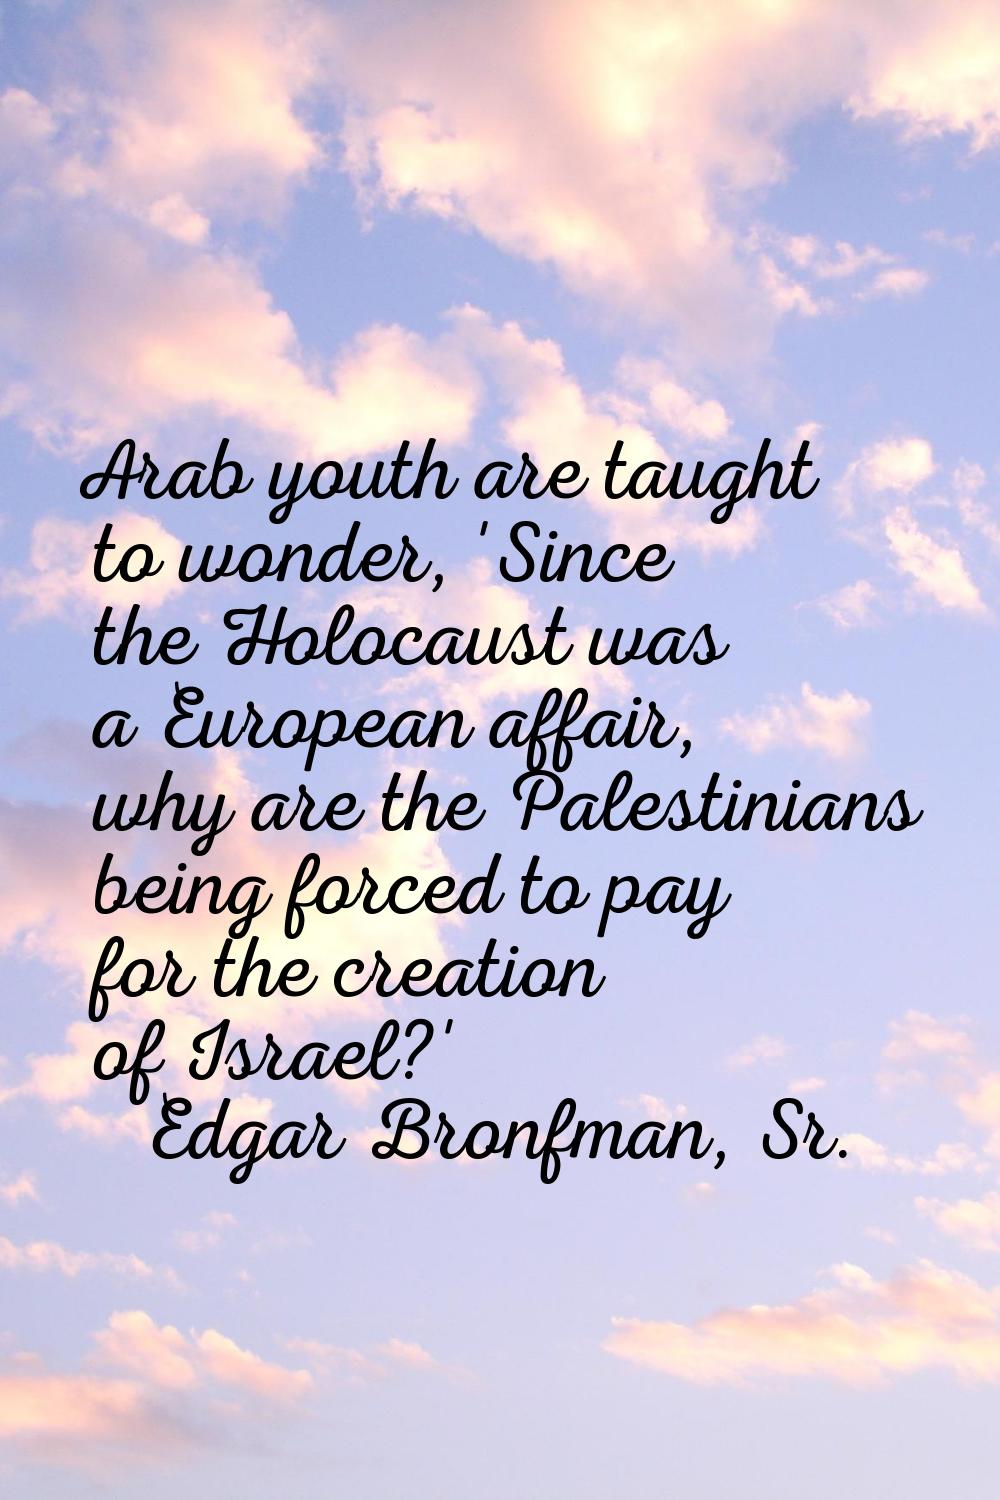 Arab youth are taught to wonder, 'Since the Holocaust was a European affair, why are the Palestinia